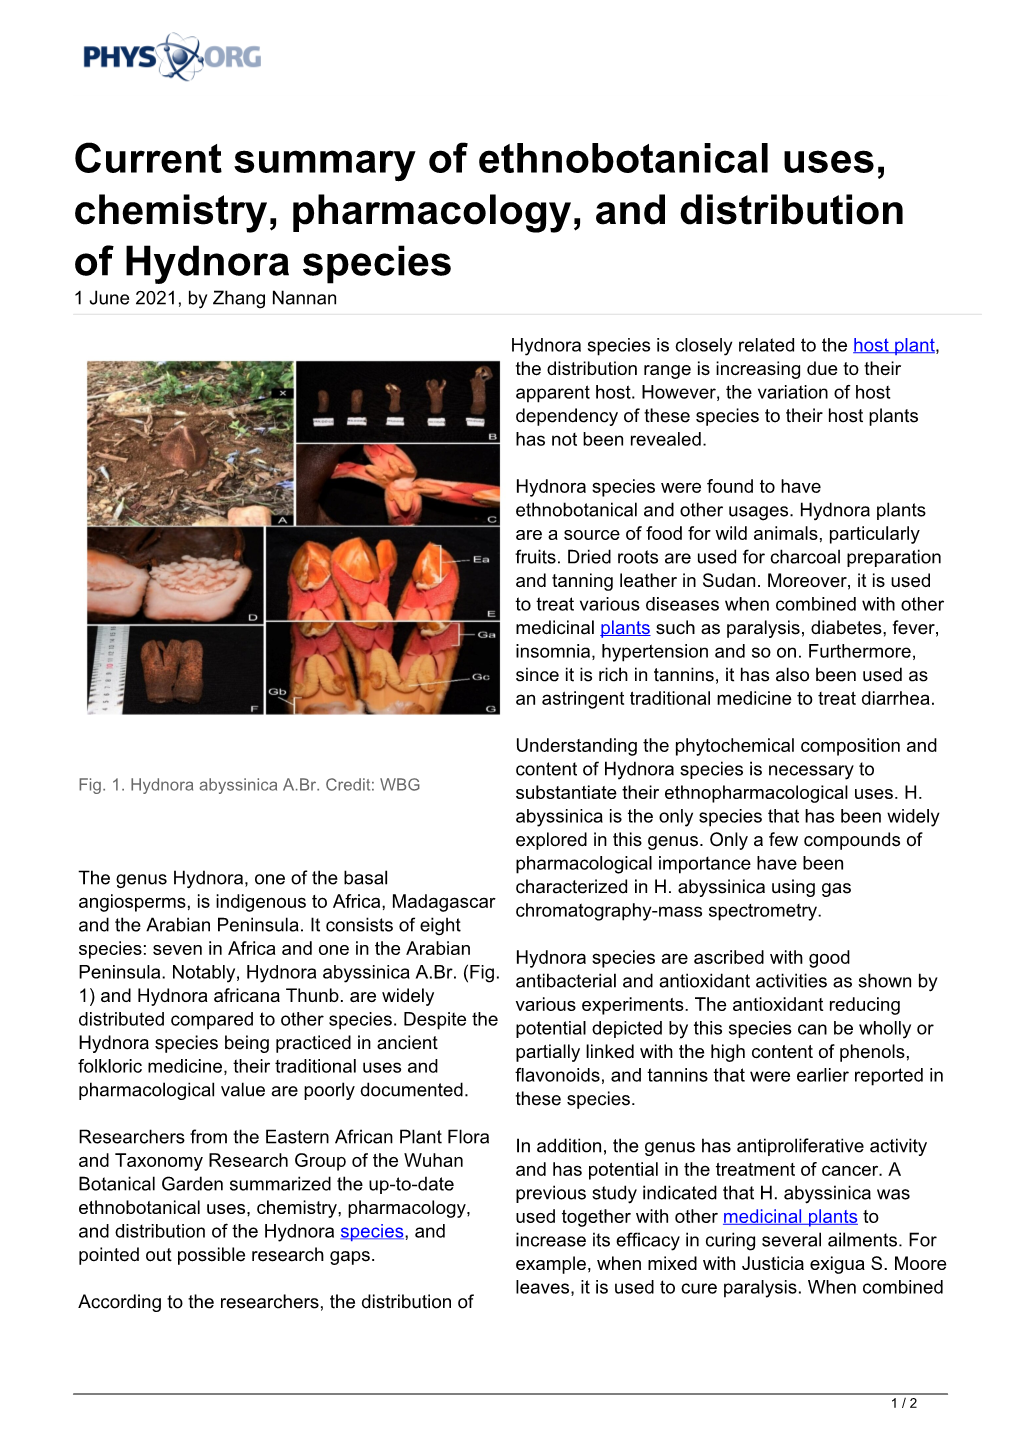 Current Summary of Ethnobotanical Uses, Chemistry, Pharmacology, and Distribution of Hydnora Species 1 June 2021, by Zhang Nannan